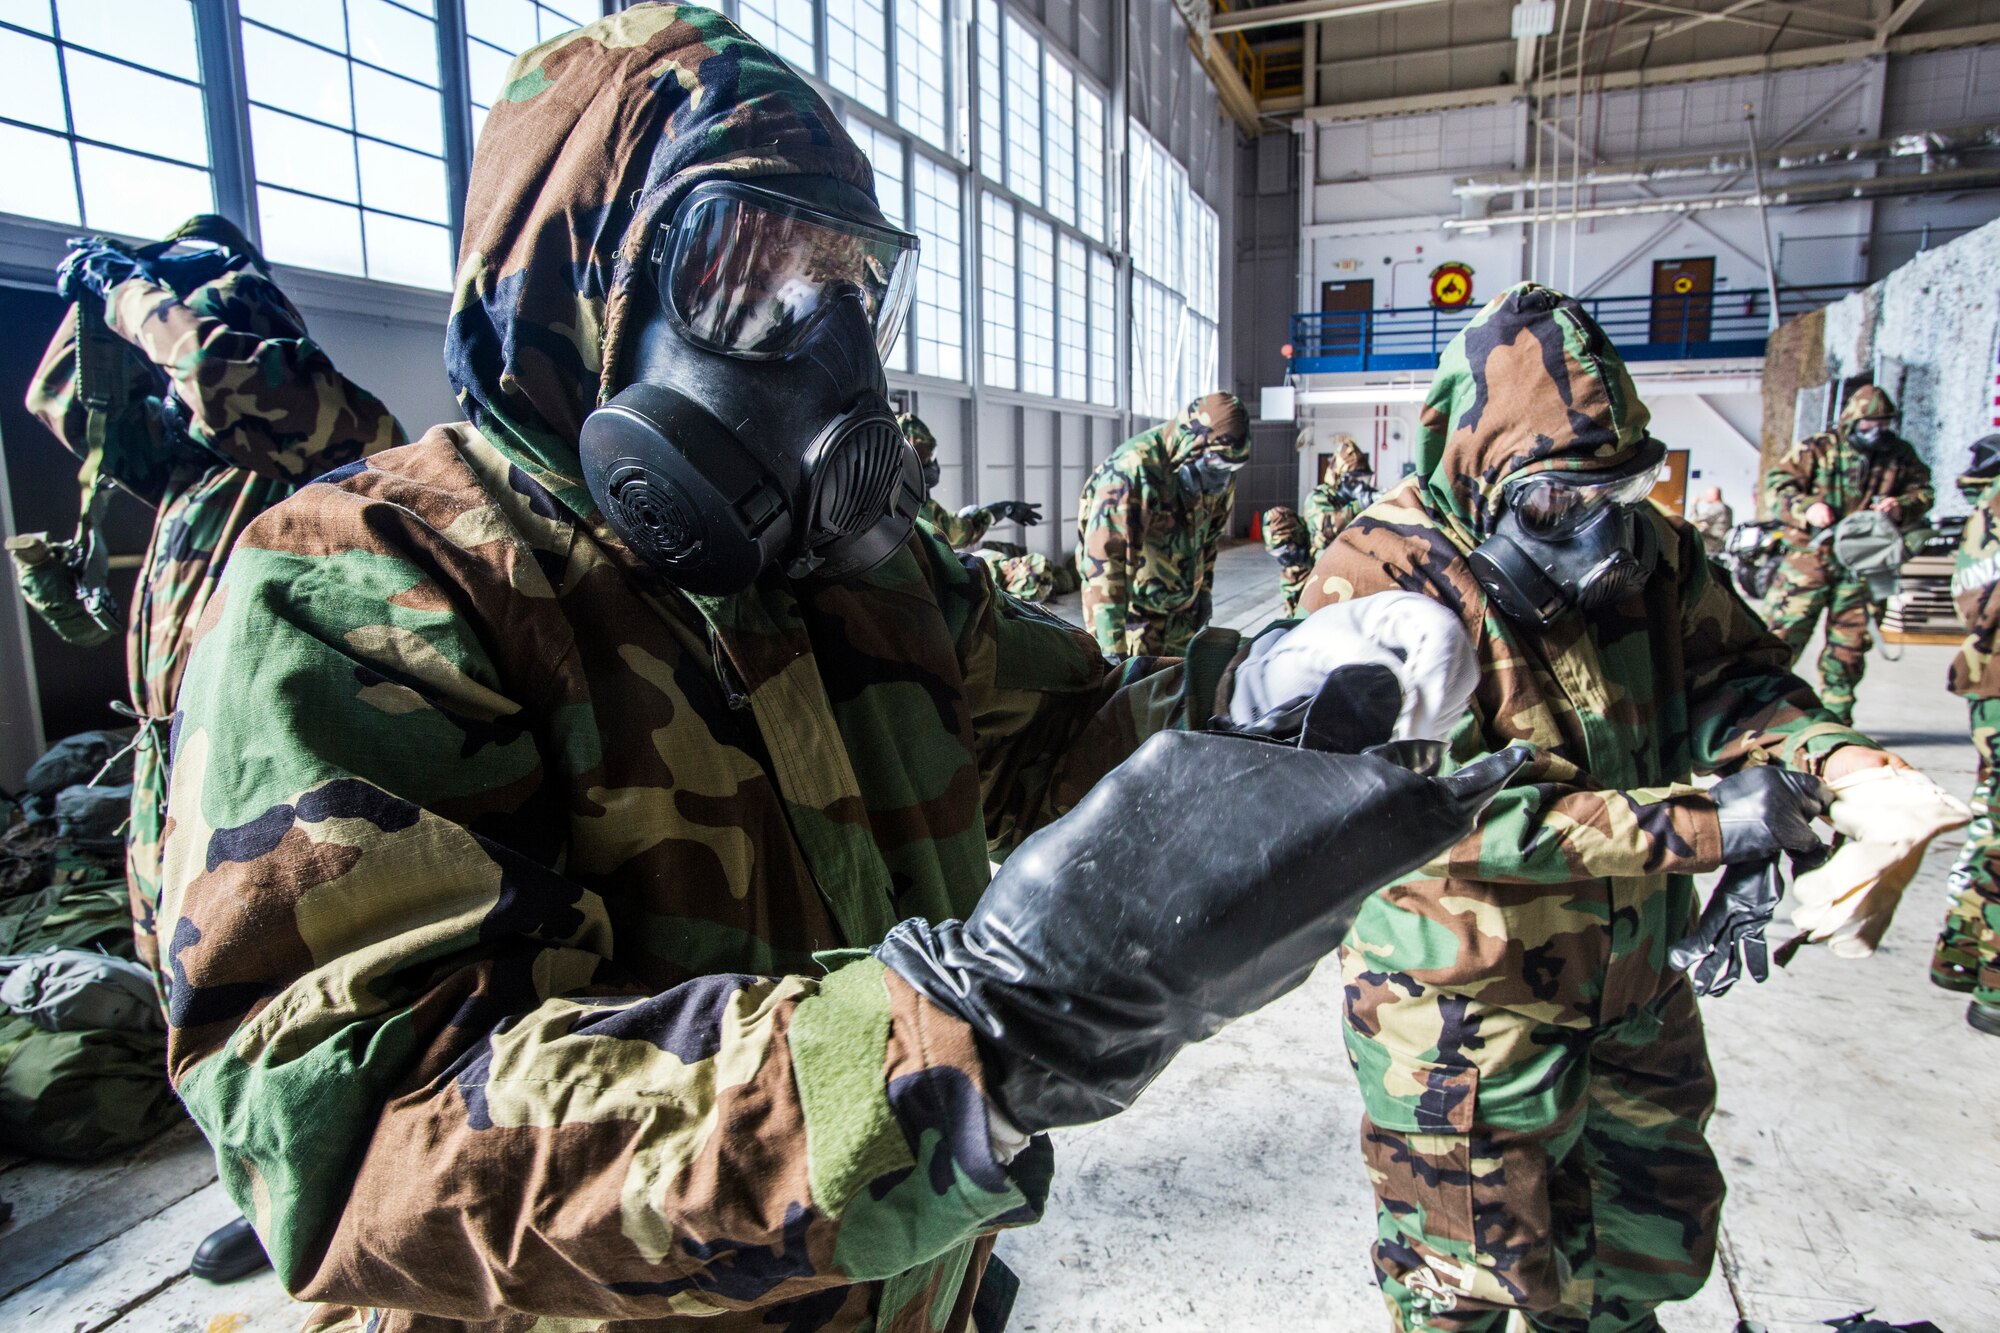 Airmen from the 108th Wing don mission-oriented protective posture gear during the Wing’s Expeditionary Skills Rodeo at Joint Base McGuire-Dix-Lakehurst, N.J., March 7, 2015. In addition, they trained on their ability to survive and operate in a chemical, biological, radiological and nuclear environment. These skills make up the foundation necessary for all Airmen to function effectively in hostile environments. (U.S. Air National Guard photo by Master Sgt. Mark C. Olsen/Released)